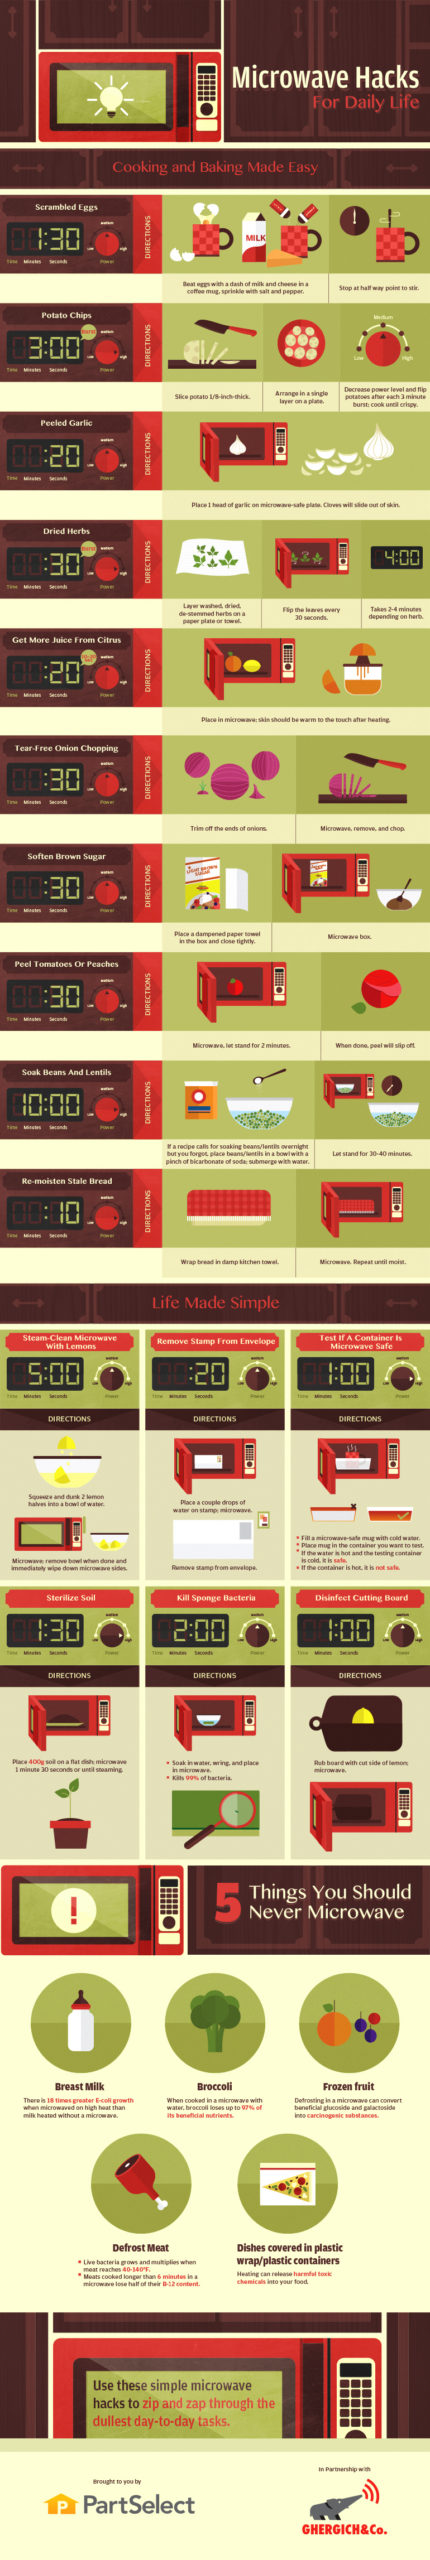 A Handy Cheat Sheet On How To Best Use Your Microwave [Infographic]